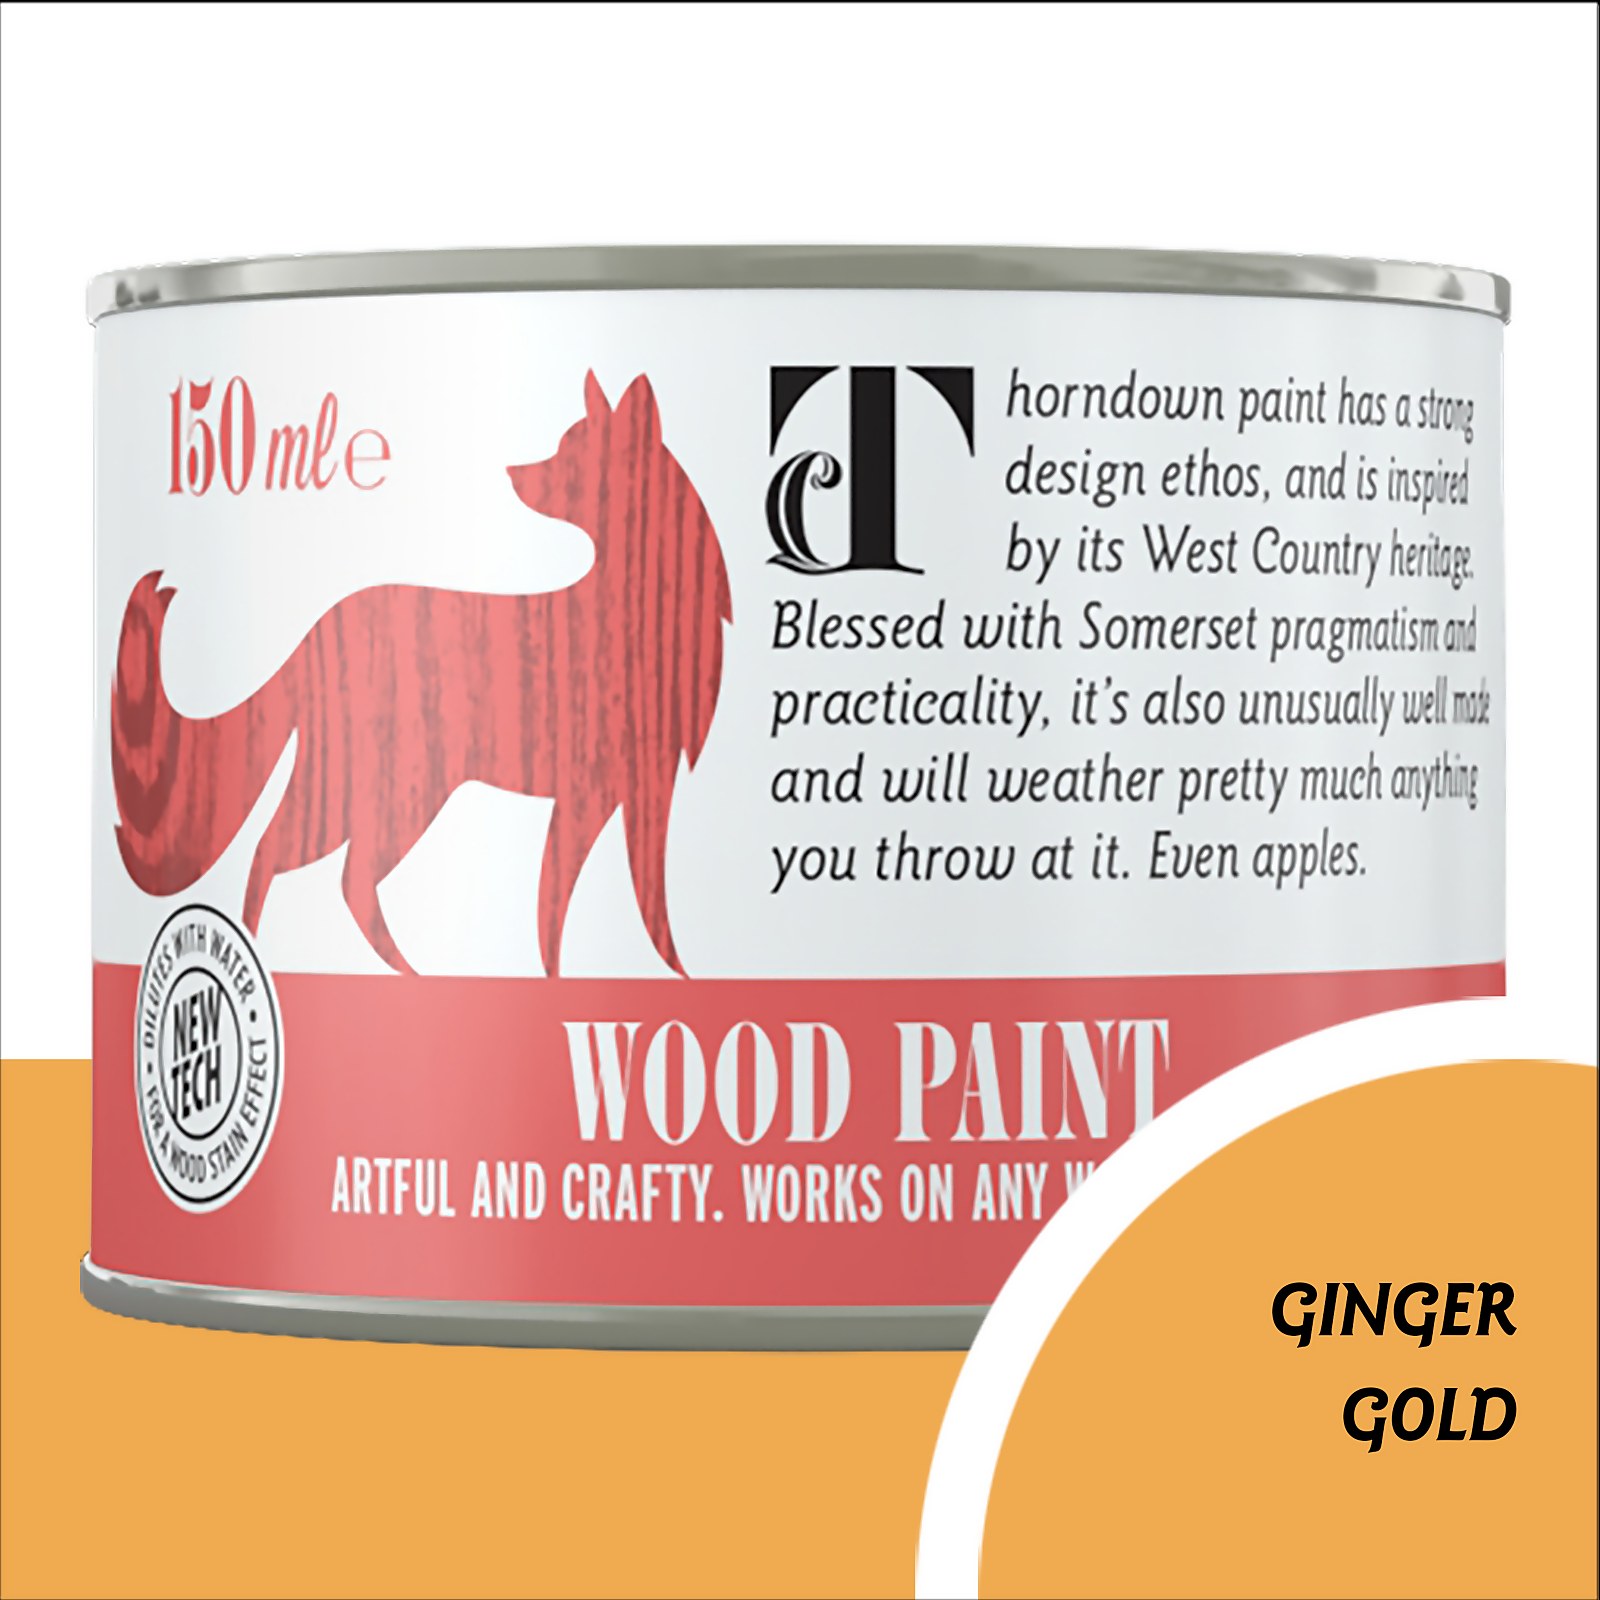 Photo of Thorndown Ginger Gold Wood Paint 150ml